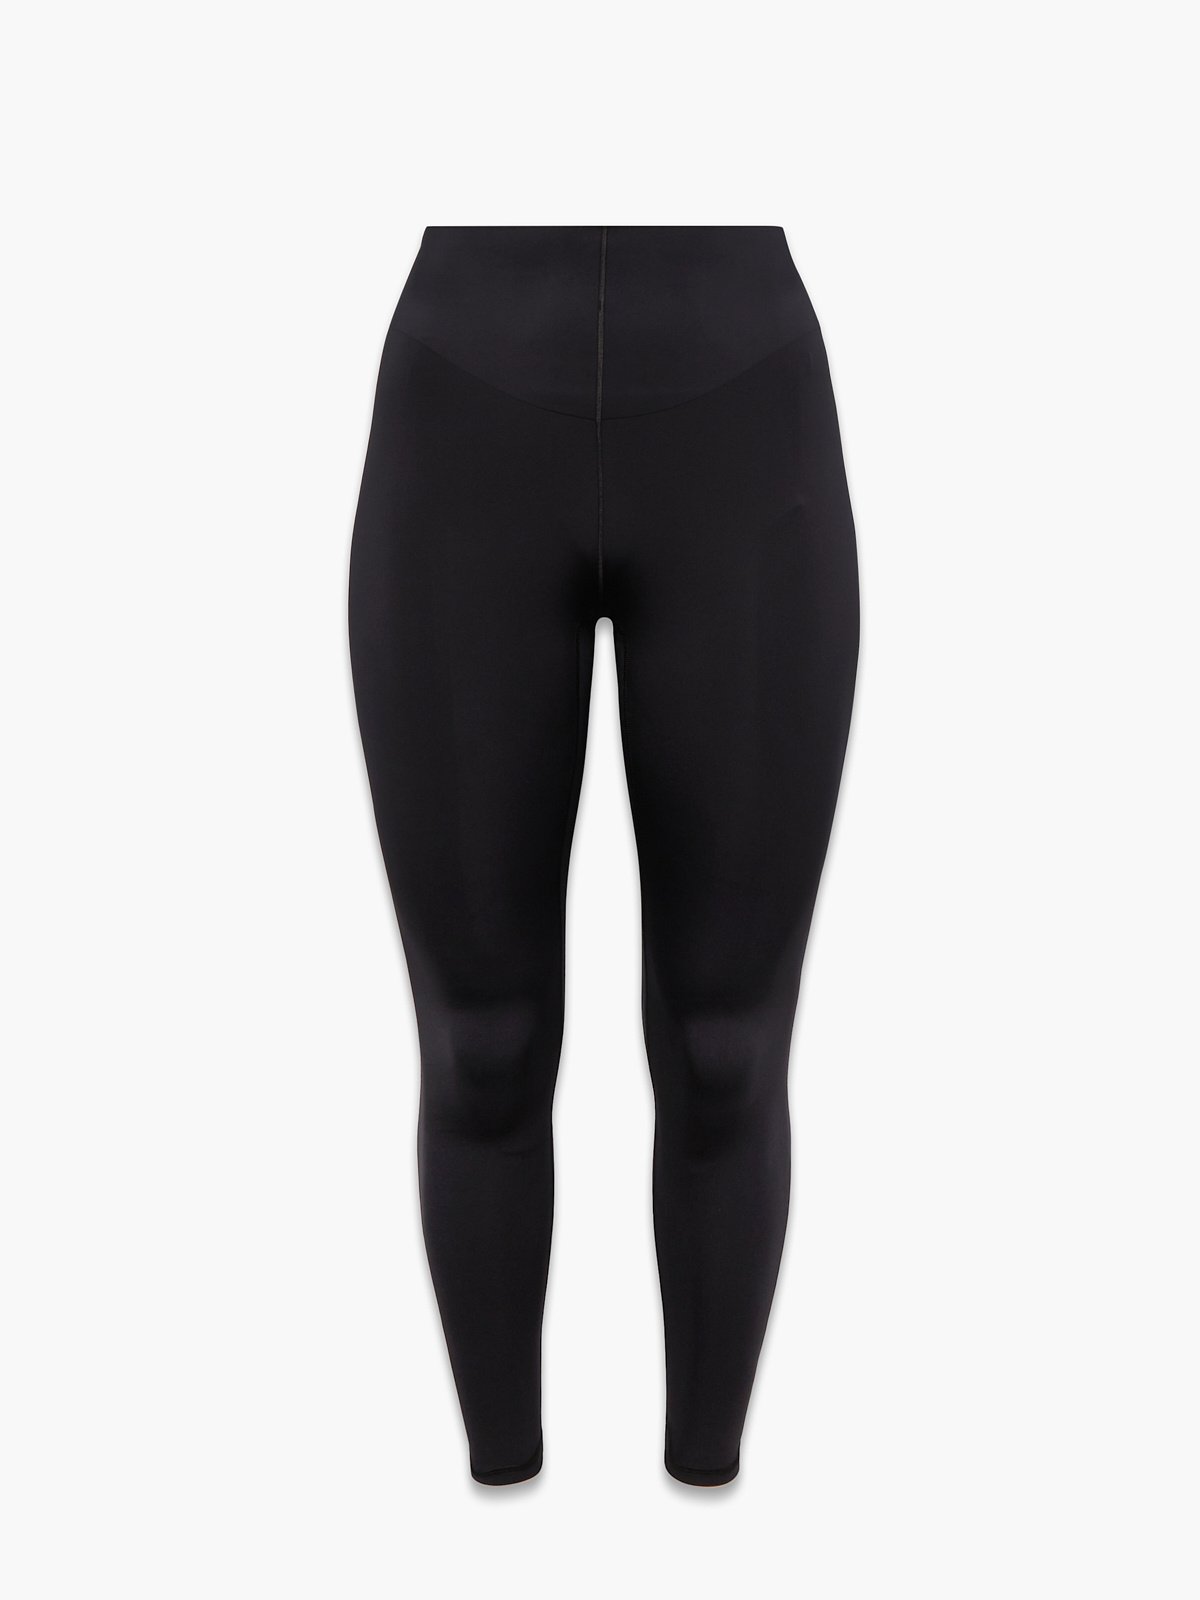 s £8 'super flattering' leggings that 'snatch you in